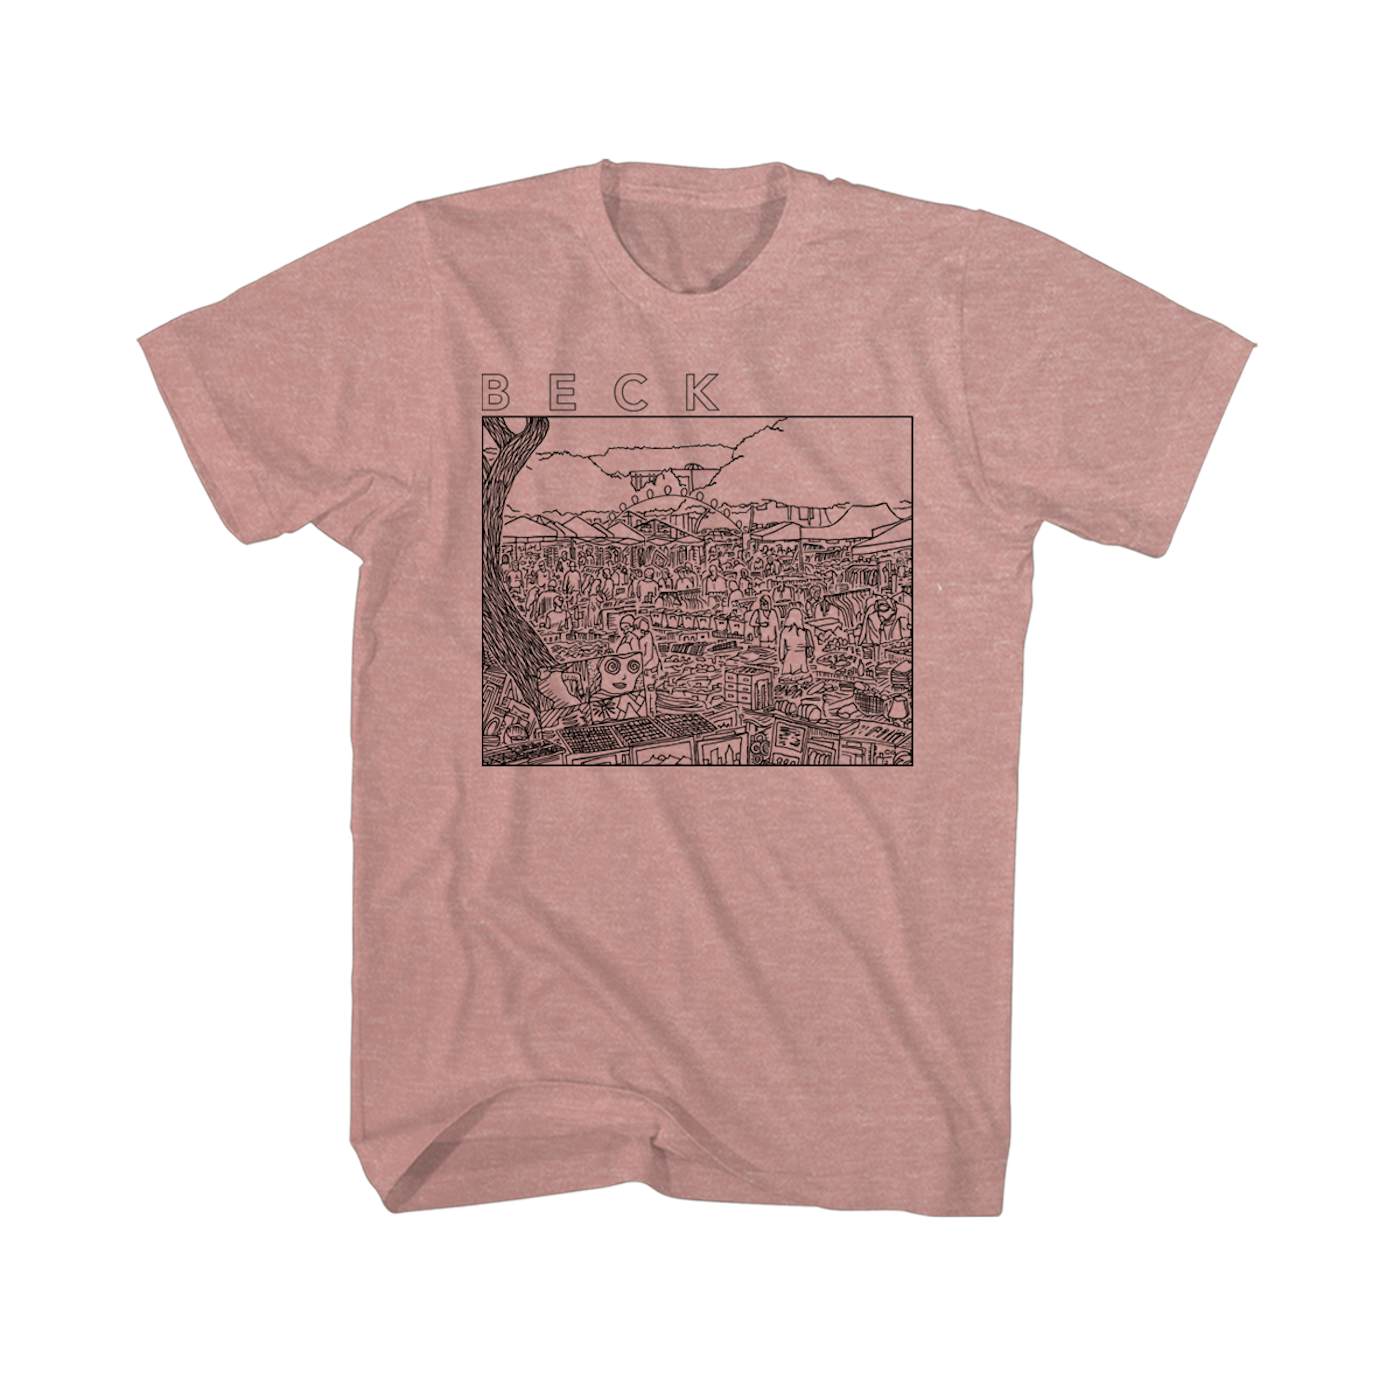 Beck Trading Post Tee